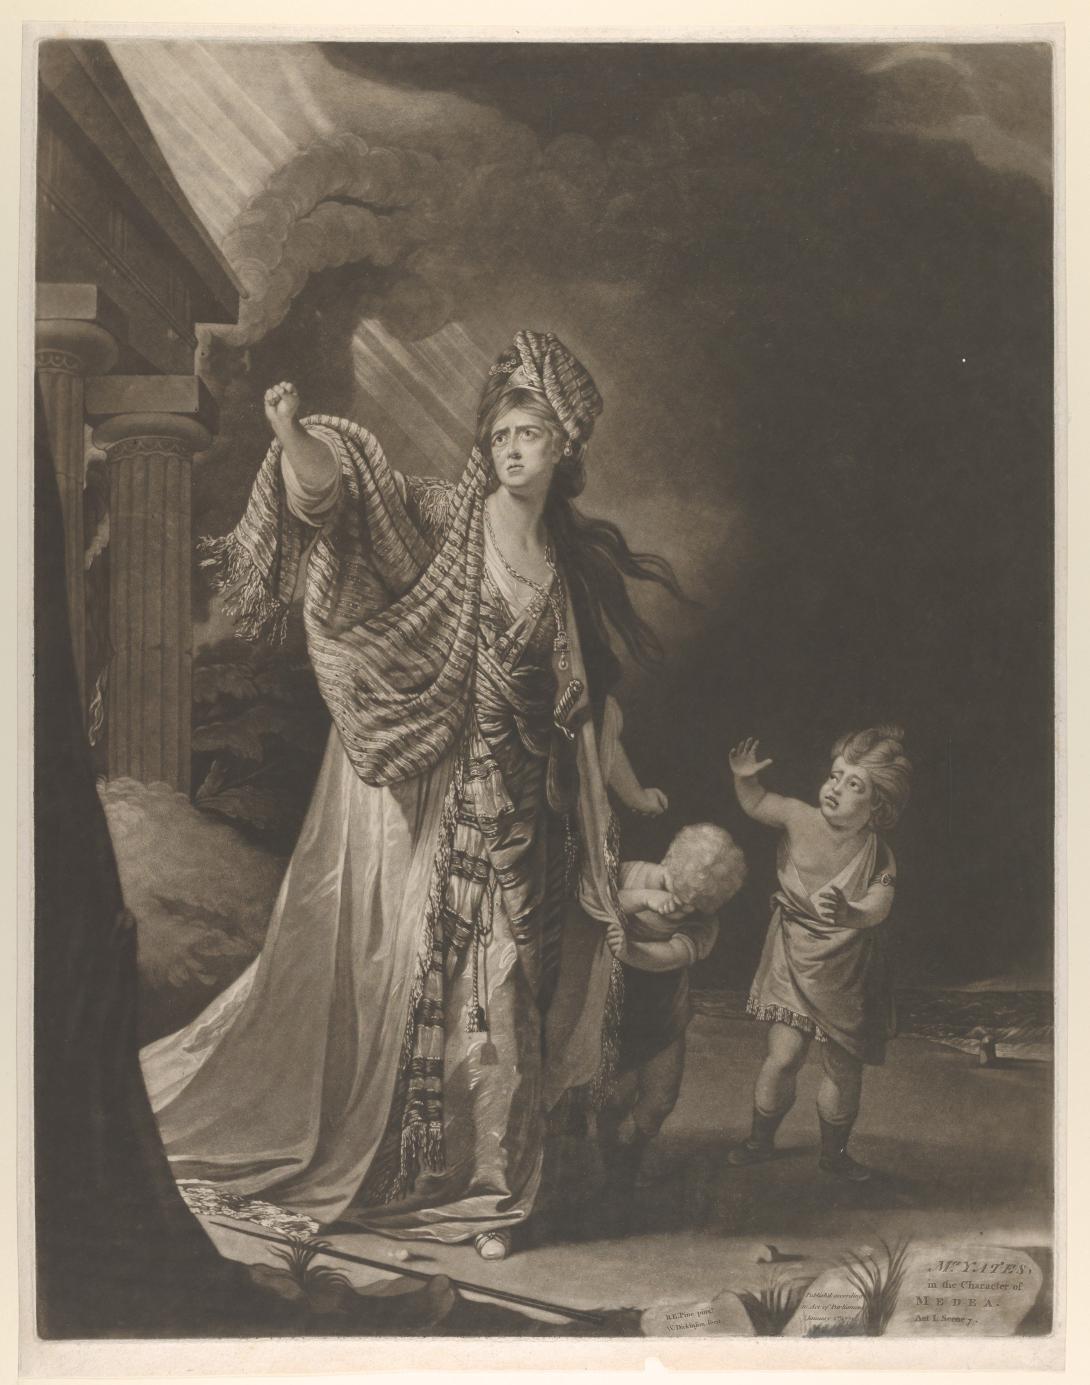 A black-and-white mezzotint depicting a scene from Medea.